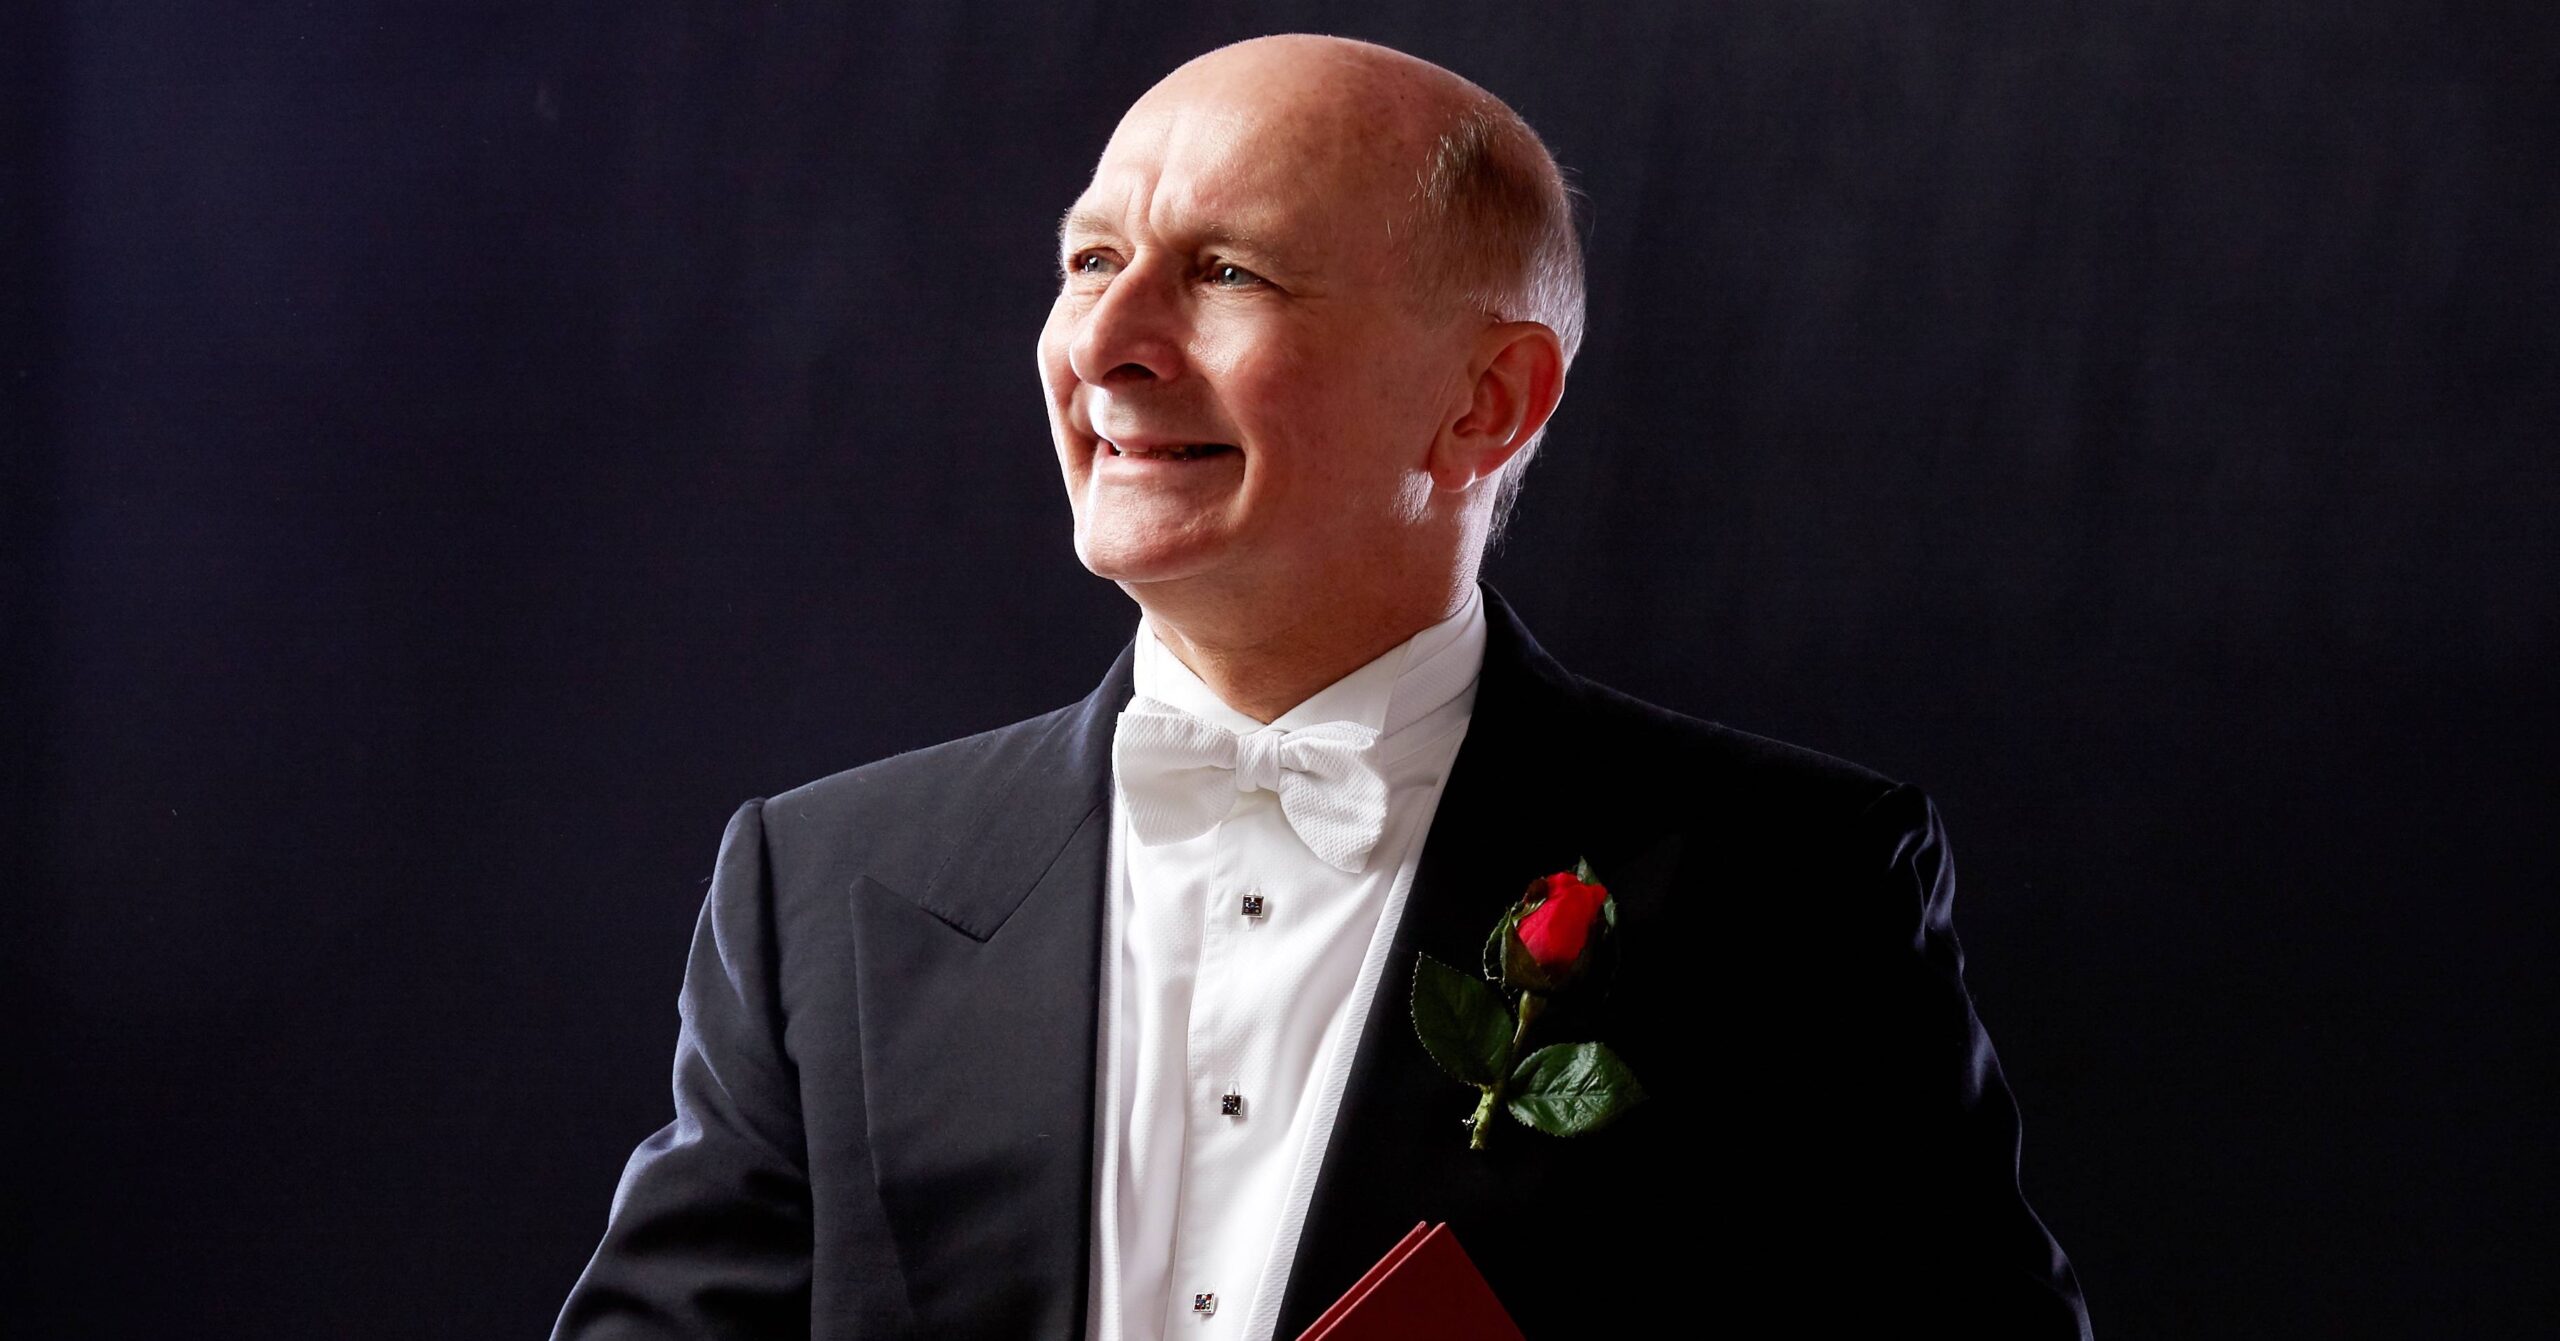 Harrogate conductor Andrew Padmore to return for farewell choral concert